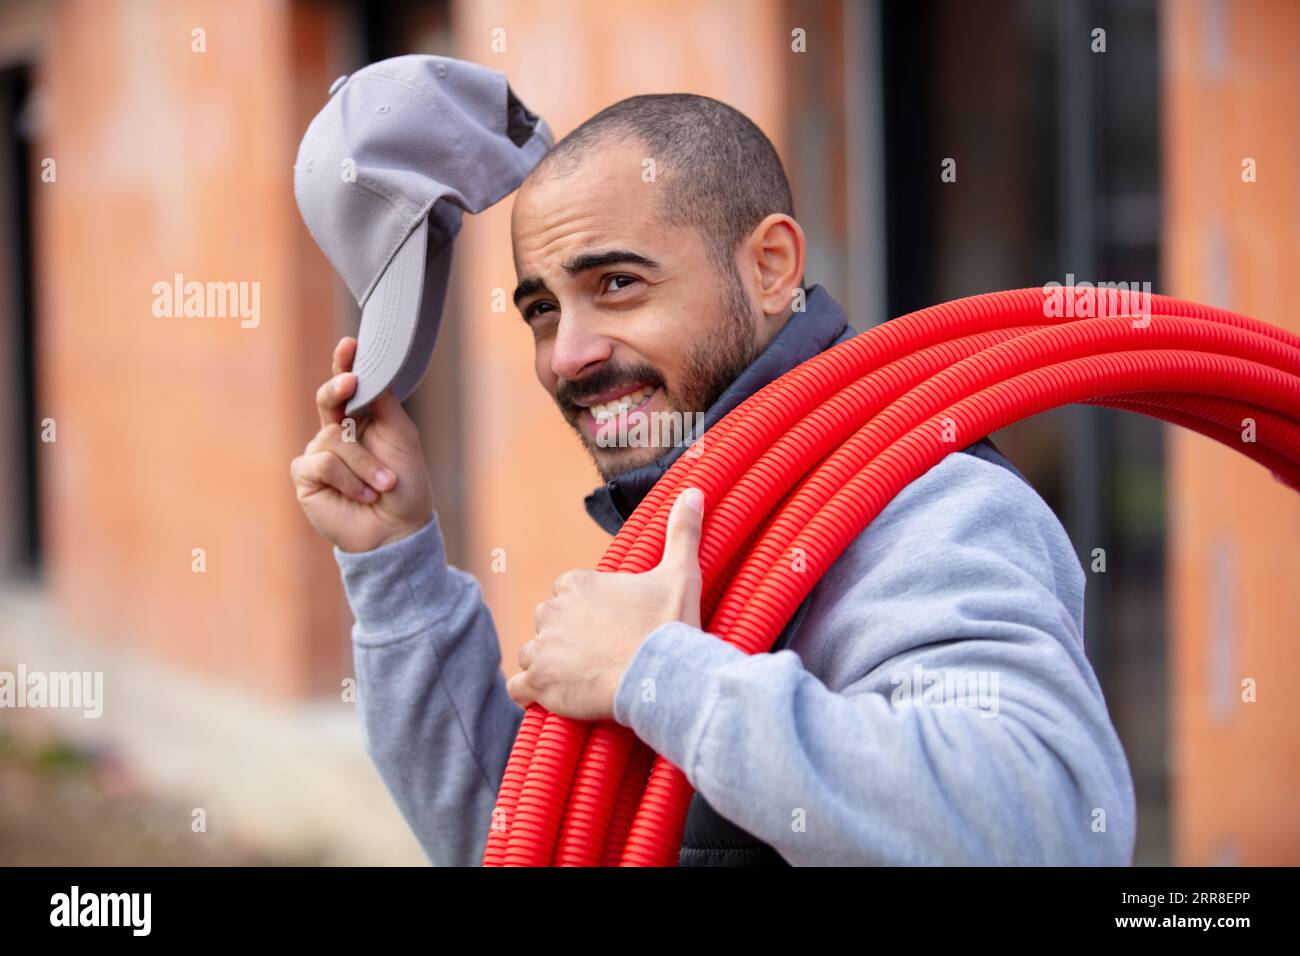 workman with roll of red corrugated plastic tubing Stock Photo